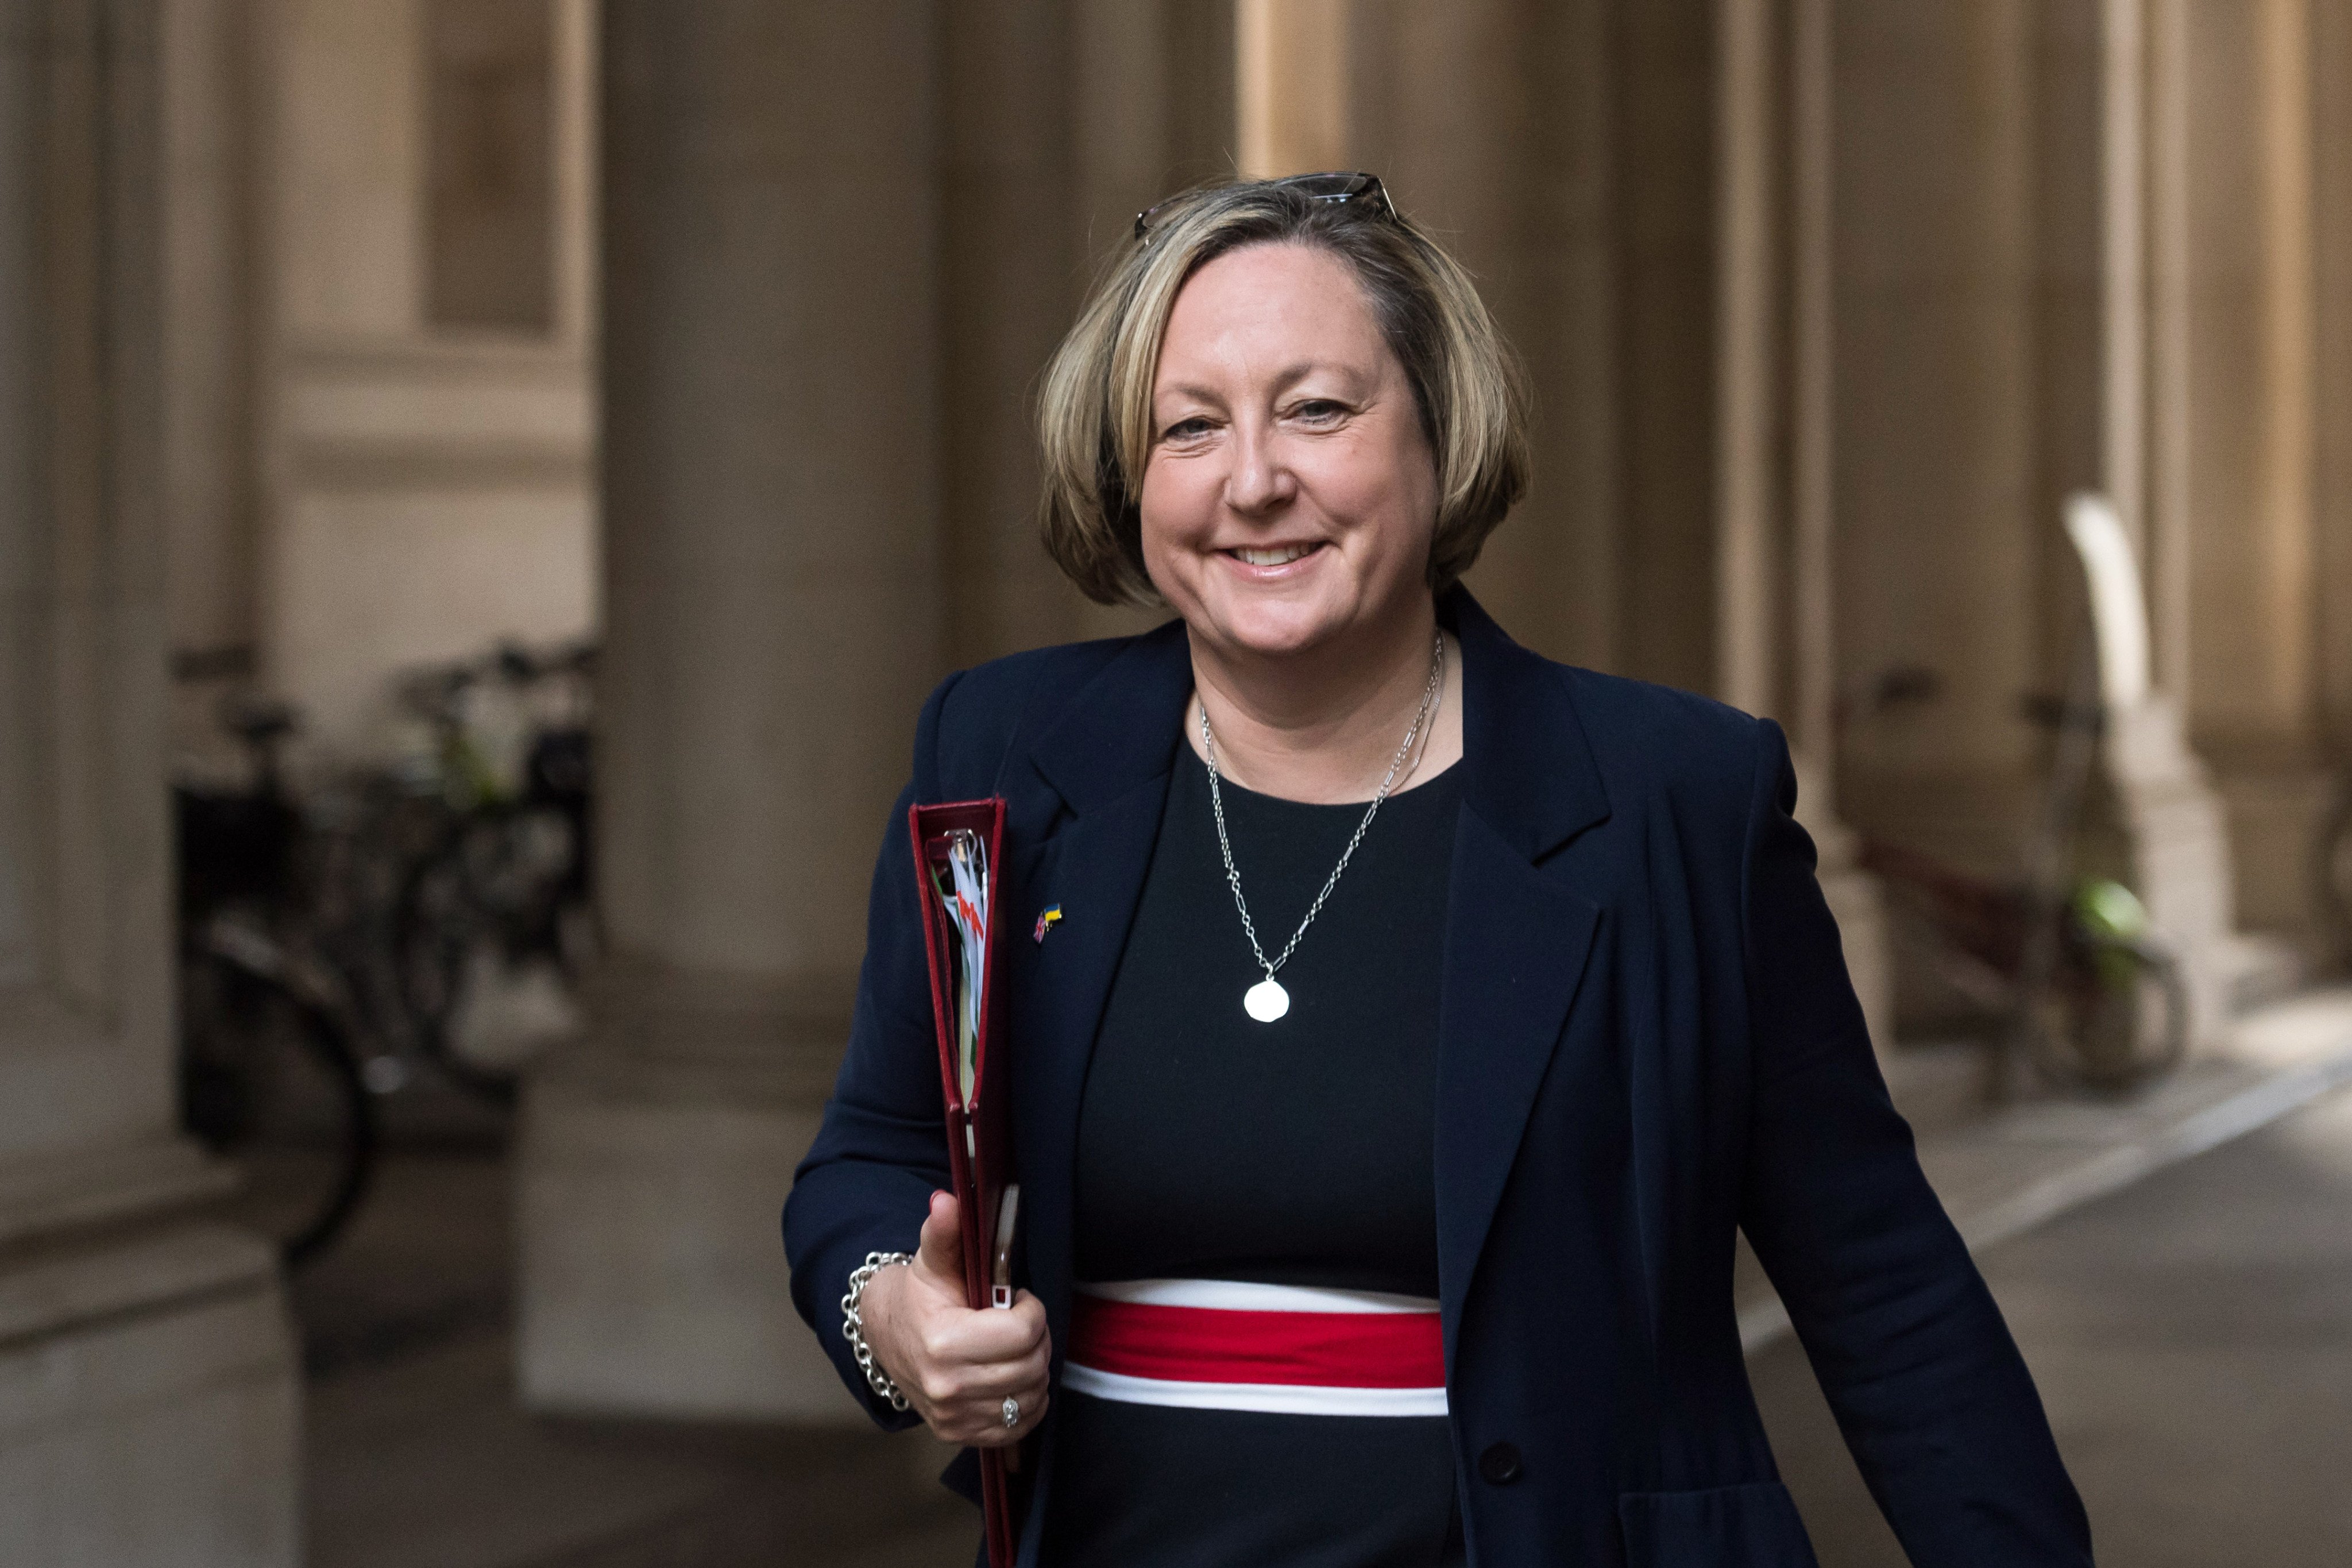 Minister for the Indo-Pacific Anne-Marie Trevelyan has pledged to make clear the UK’s position on issues with decision-makers in Beijing and Hong Kong. Photo: Getty